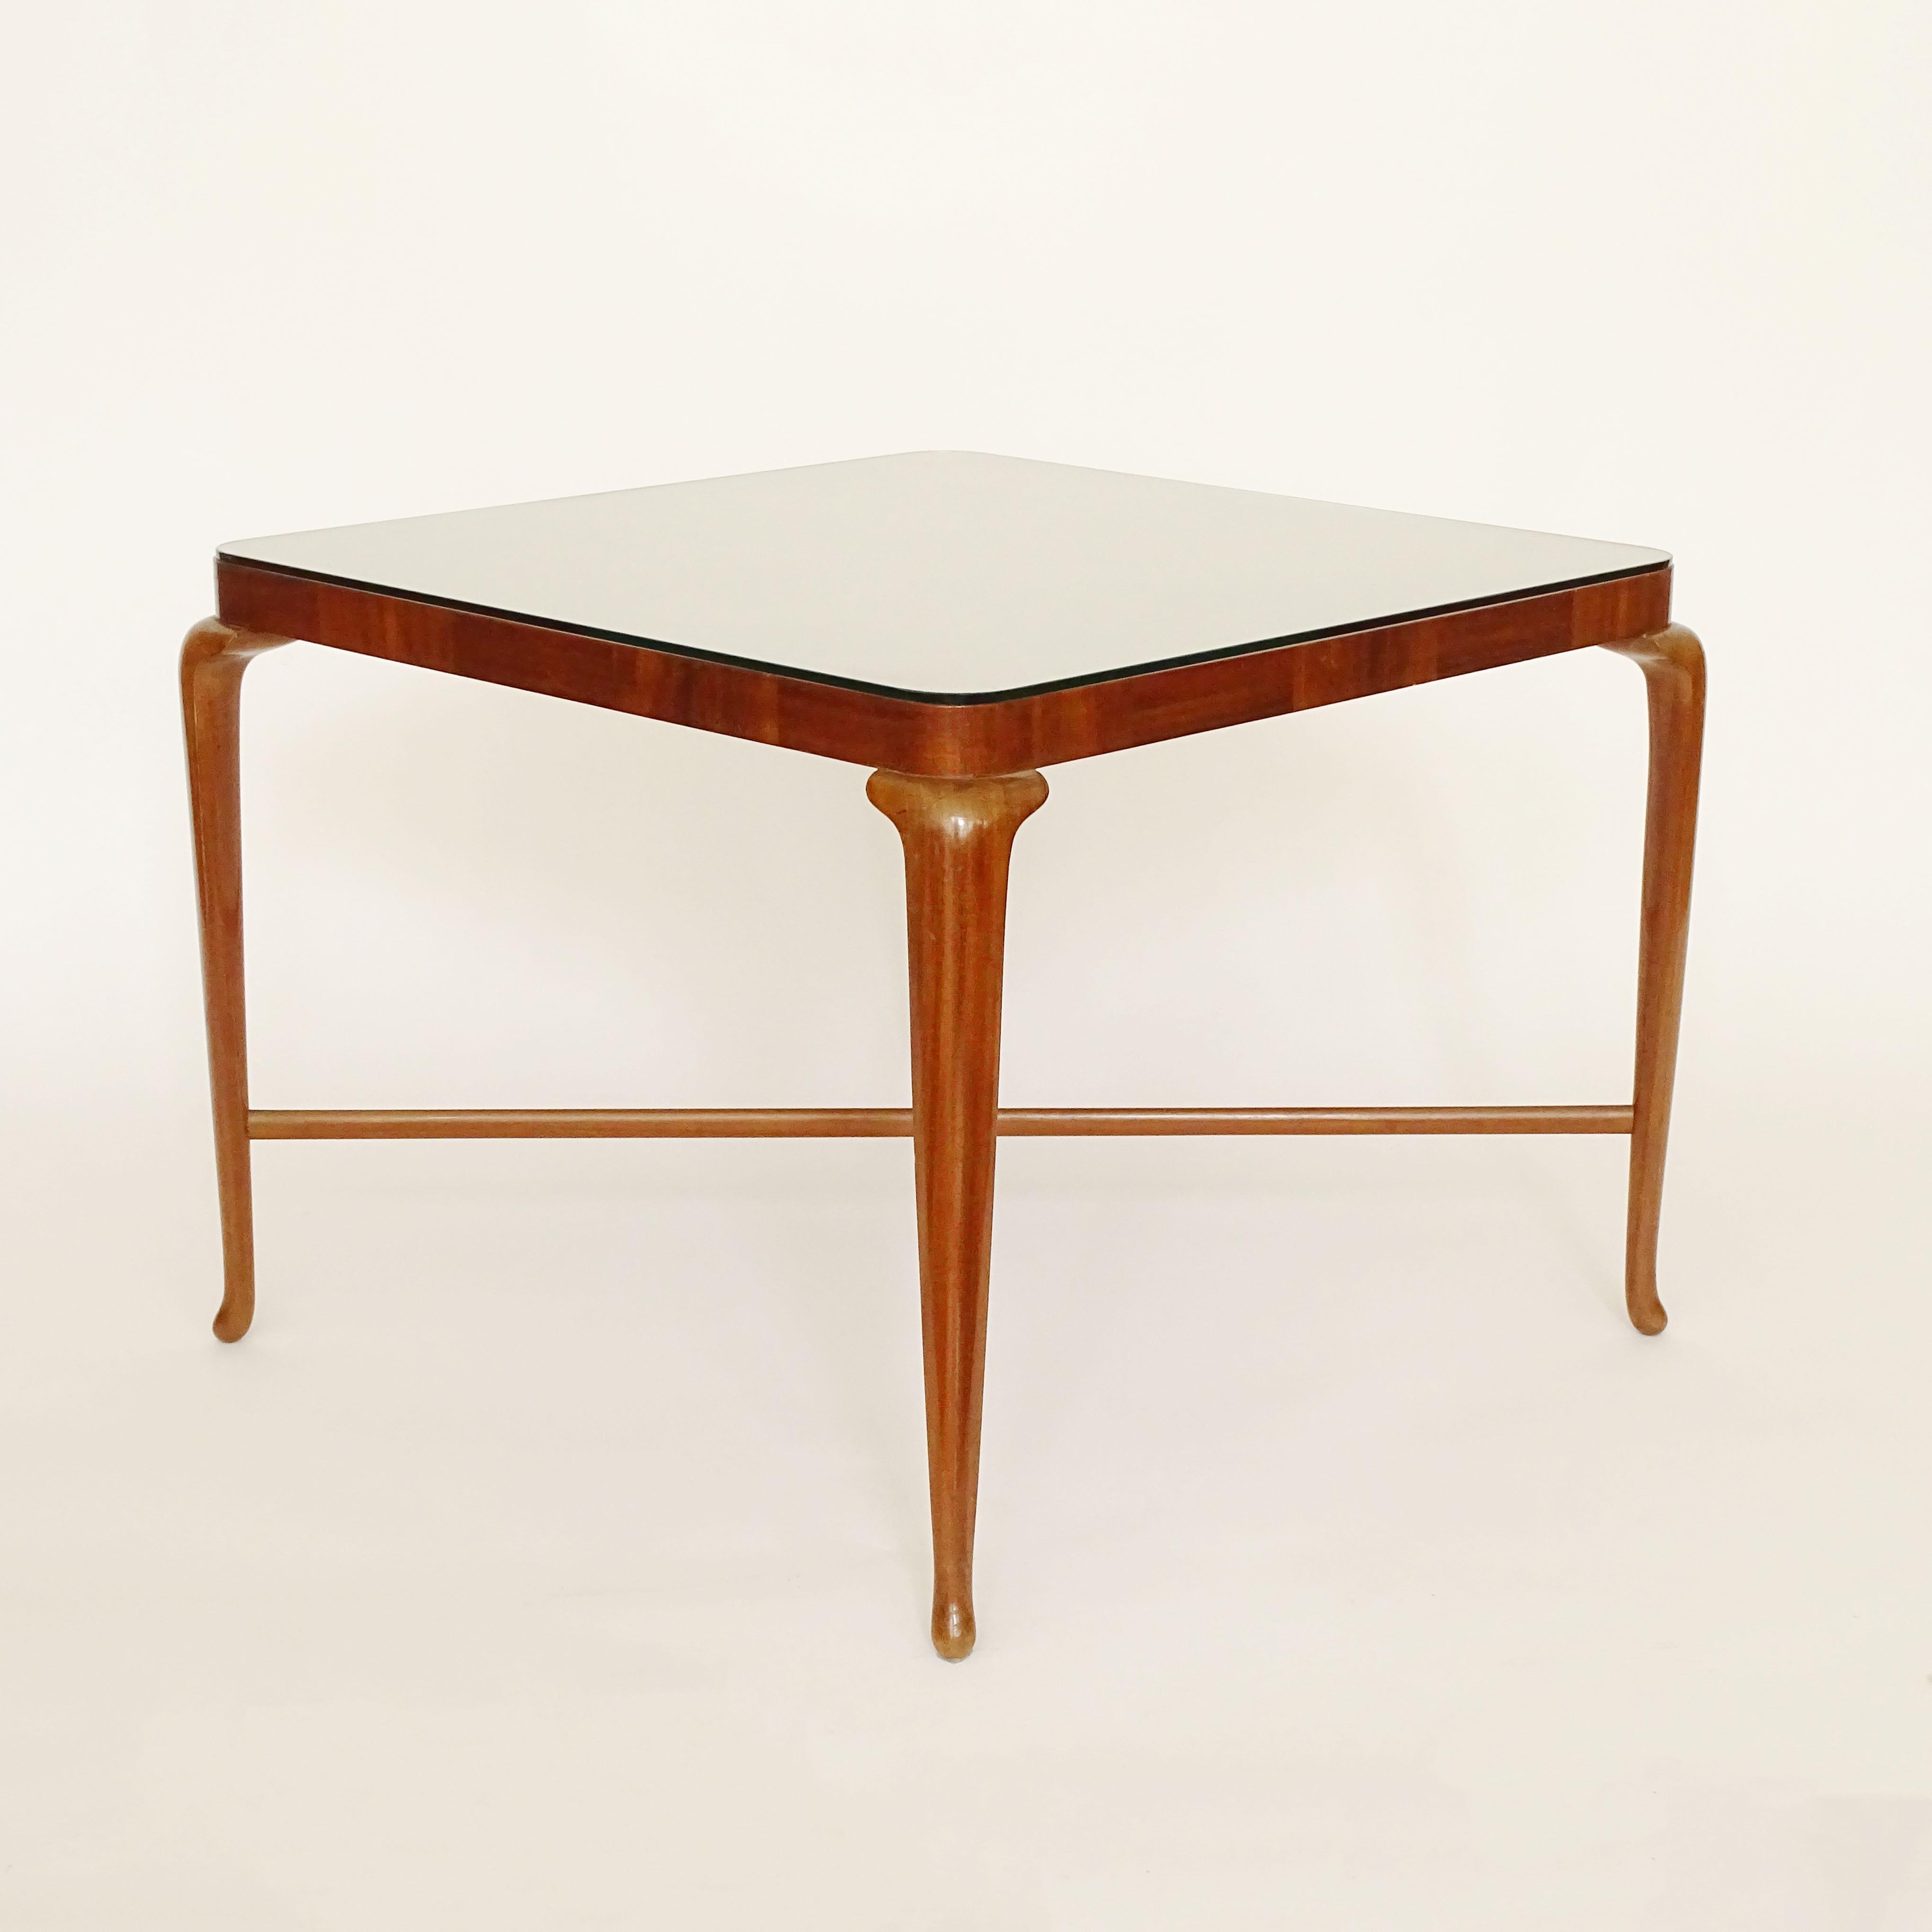 Paolo Buffa Wooden Coffee Table with Squares Top, Italy, 1940s For Sale 3